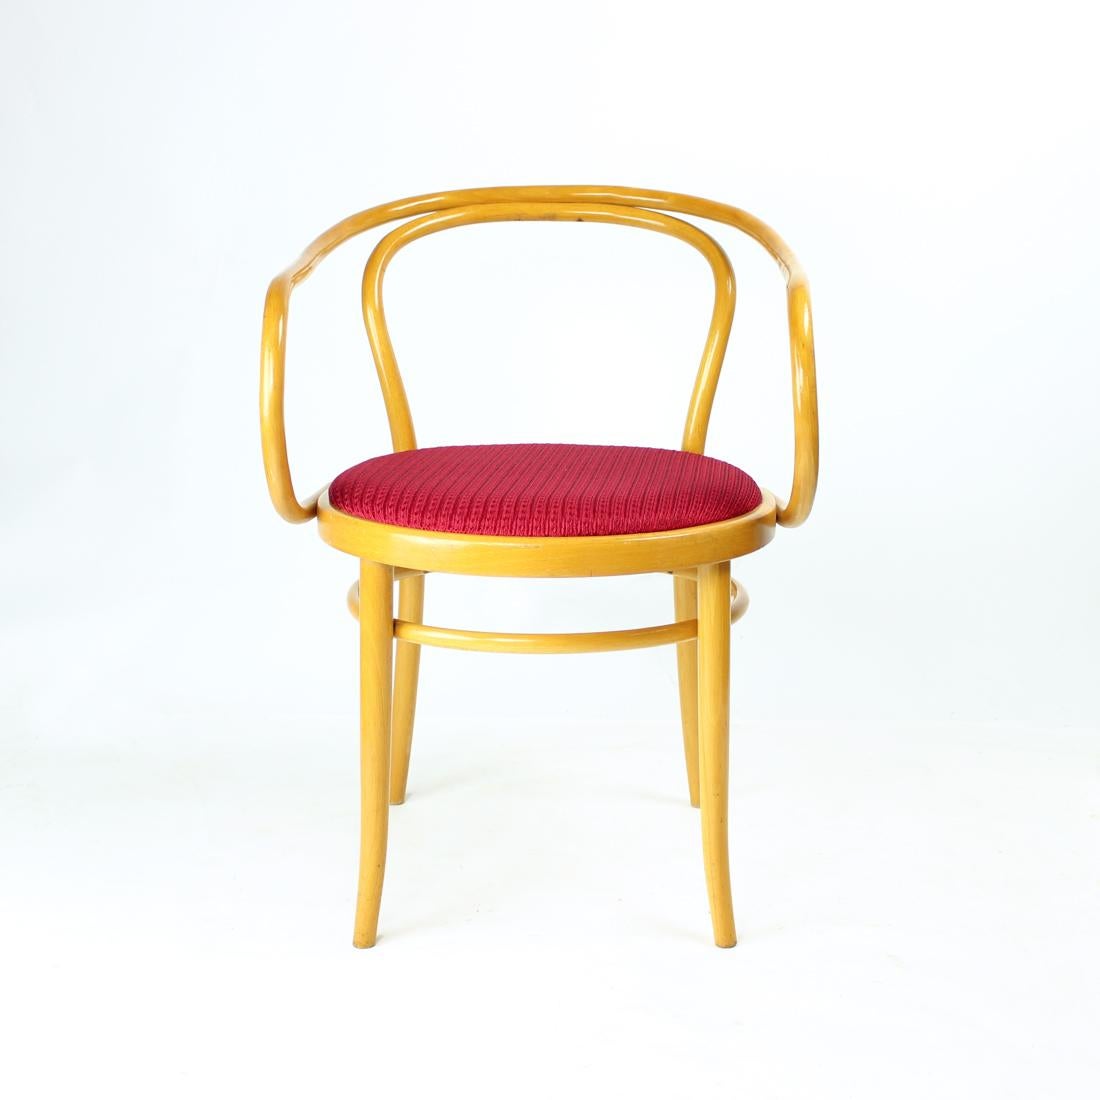 Iconic bentwood dining chairs type 30 by TON, original Thonet design. Produced in 1963, original label still attached. The chairs are a unique in their bentwood lines and elegant design. Original condition in blond oak wood and original red